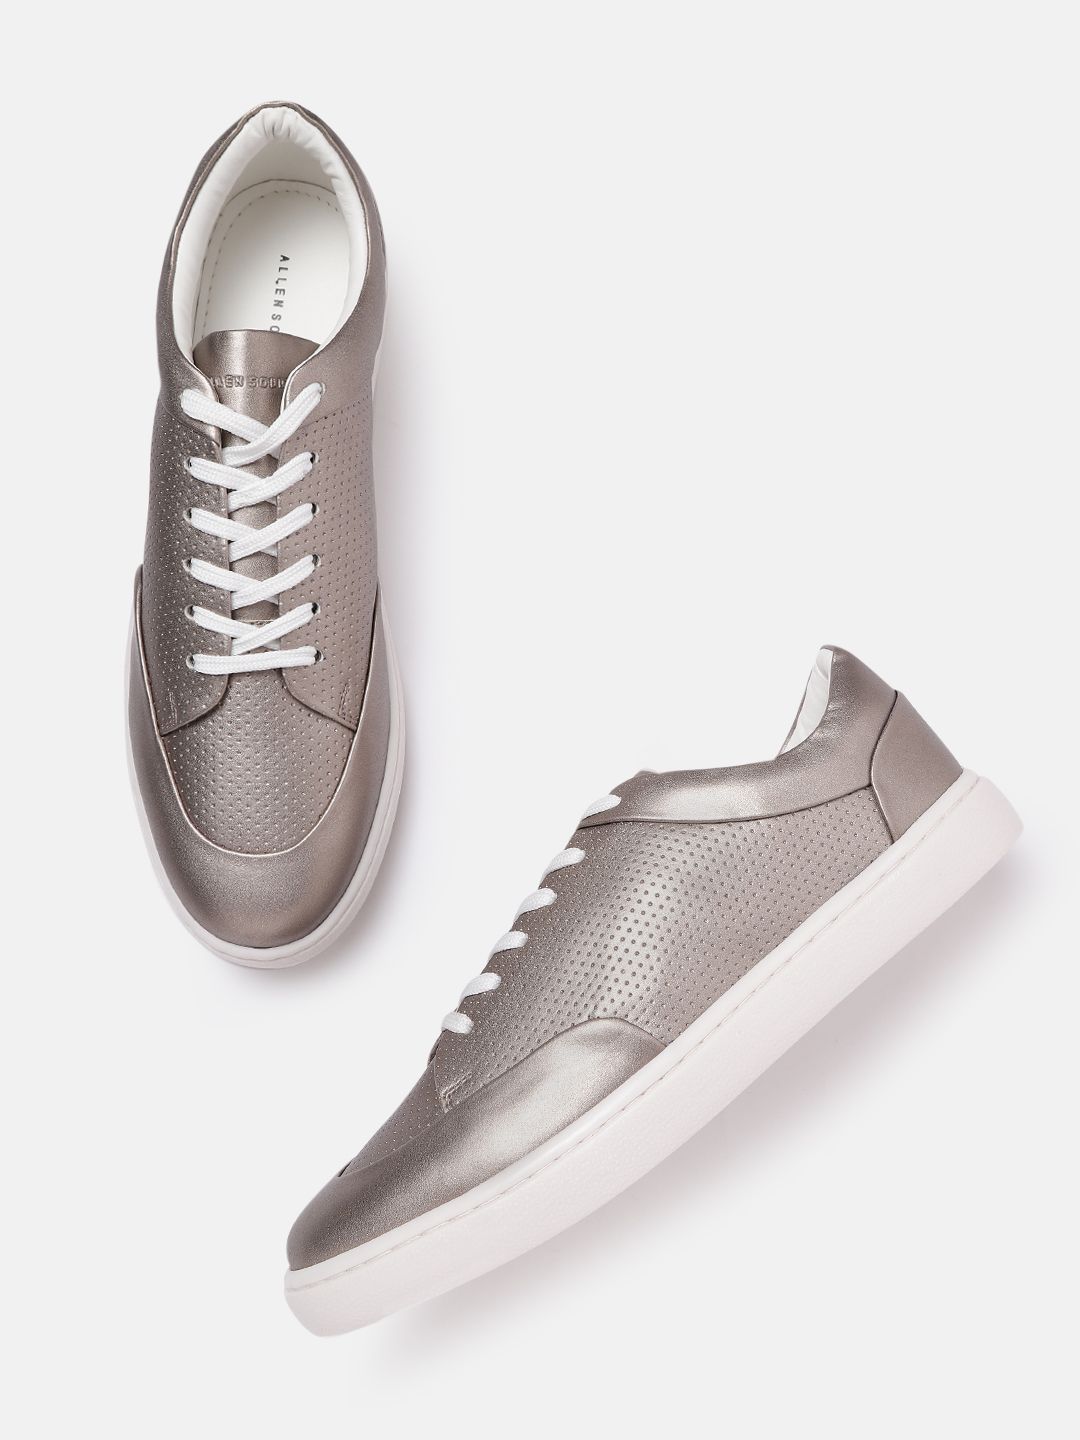 Allen Solly Women Gunmetal-Toned Perforated Sneakers Price in India